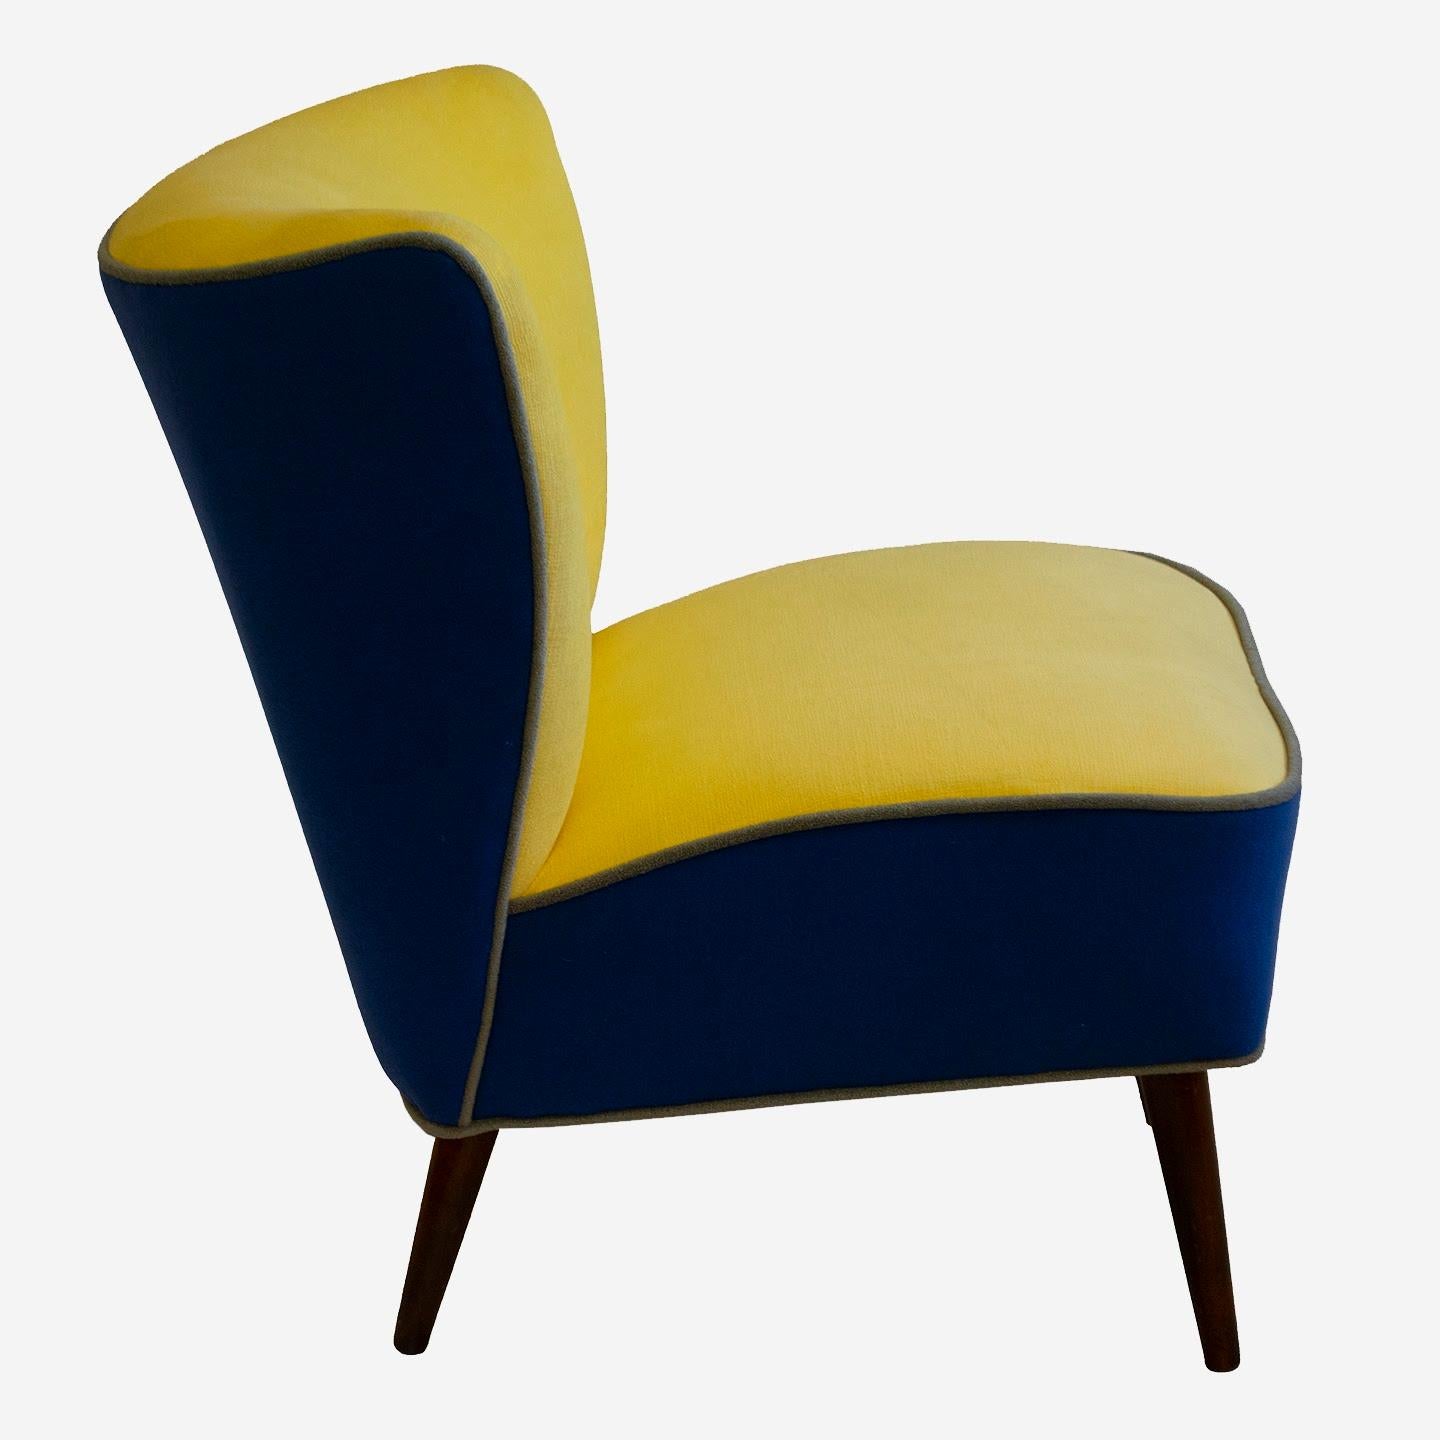 This petite slipper chair in the style of James Mont has multiple uses and is suitable as a cheerful accent chair in any room of the house. It has a colorful and playful color scheme, utilizing a blue and yellow combination. This fun piece will